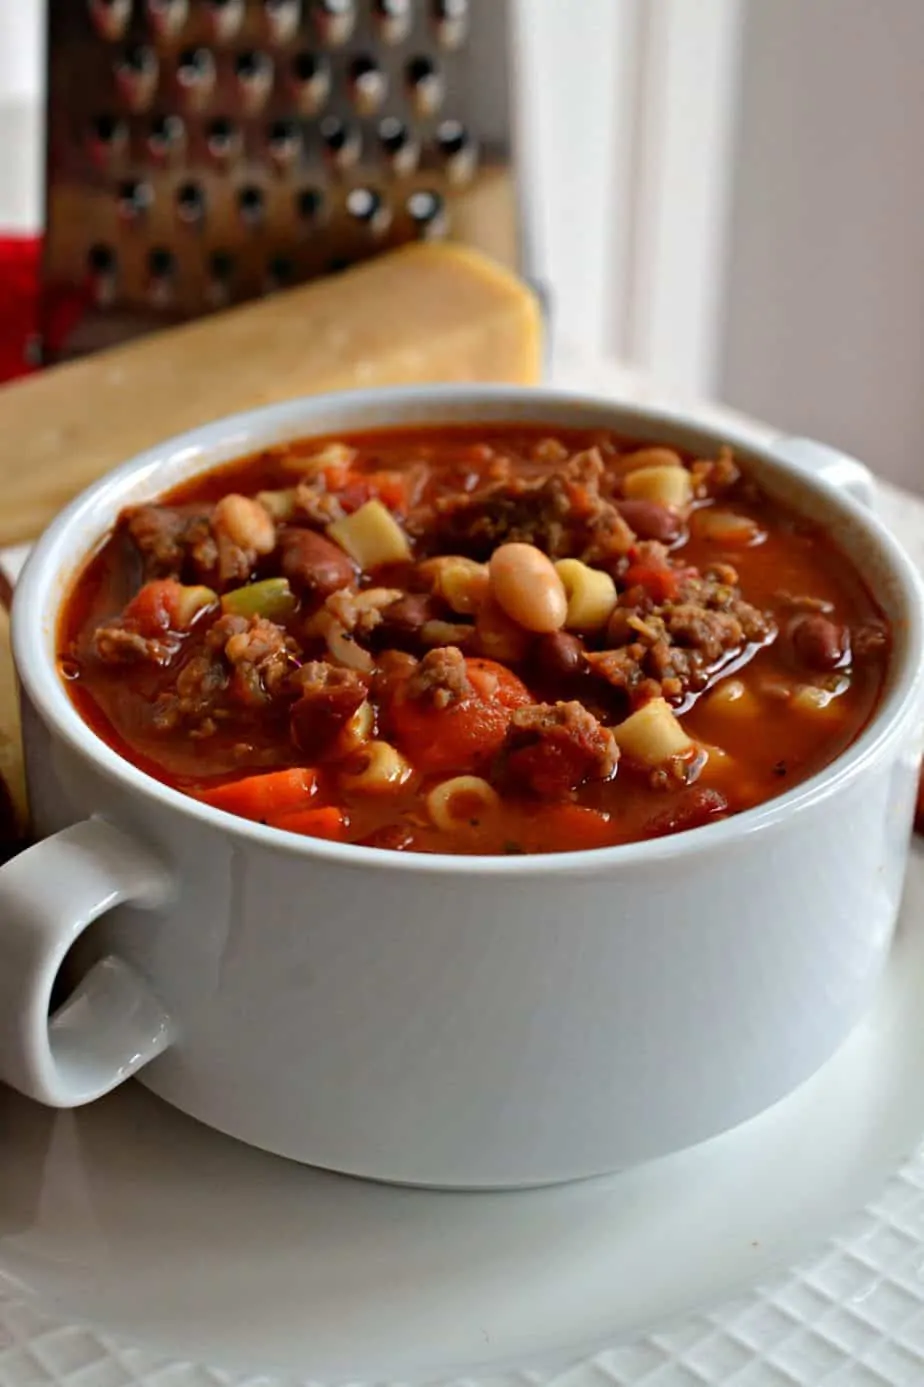 Pasta e Fagioli is a delectable Italian soup that combines Italian sausage, vegetables and beans in a rich tomato base.